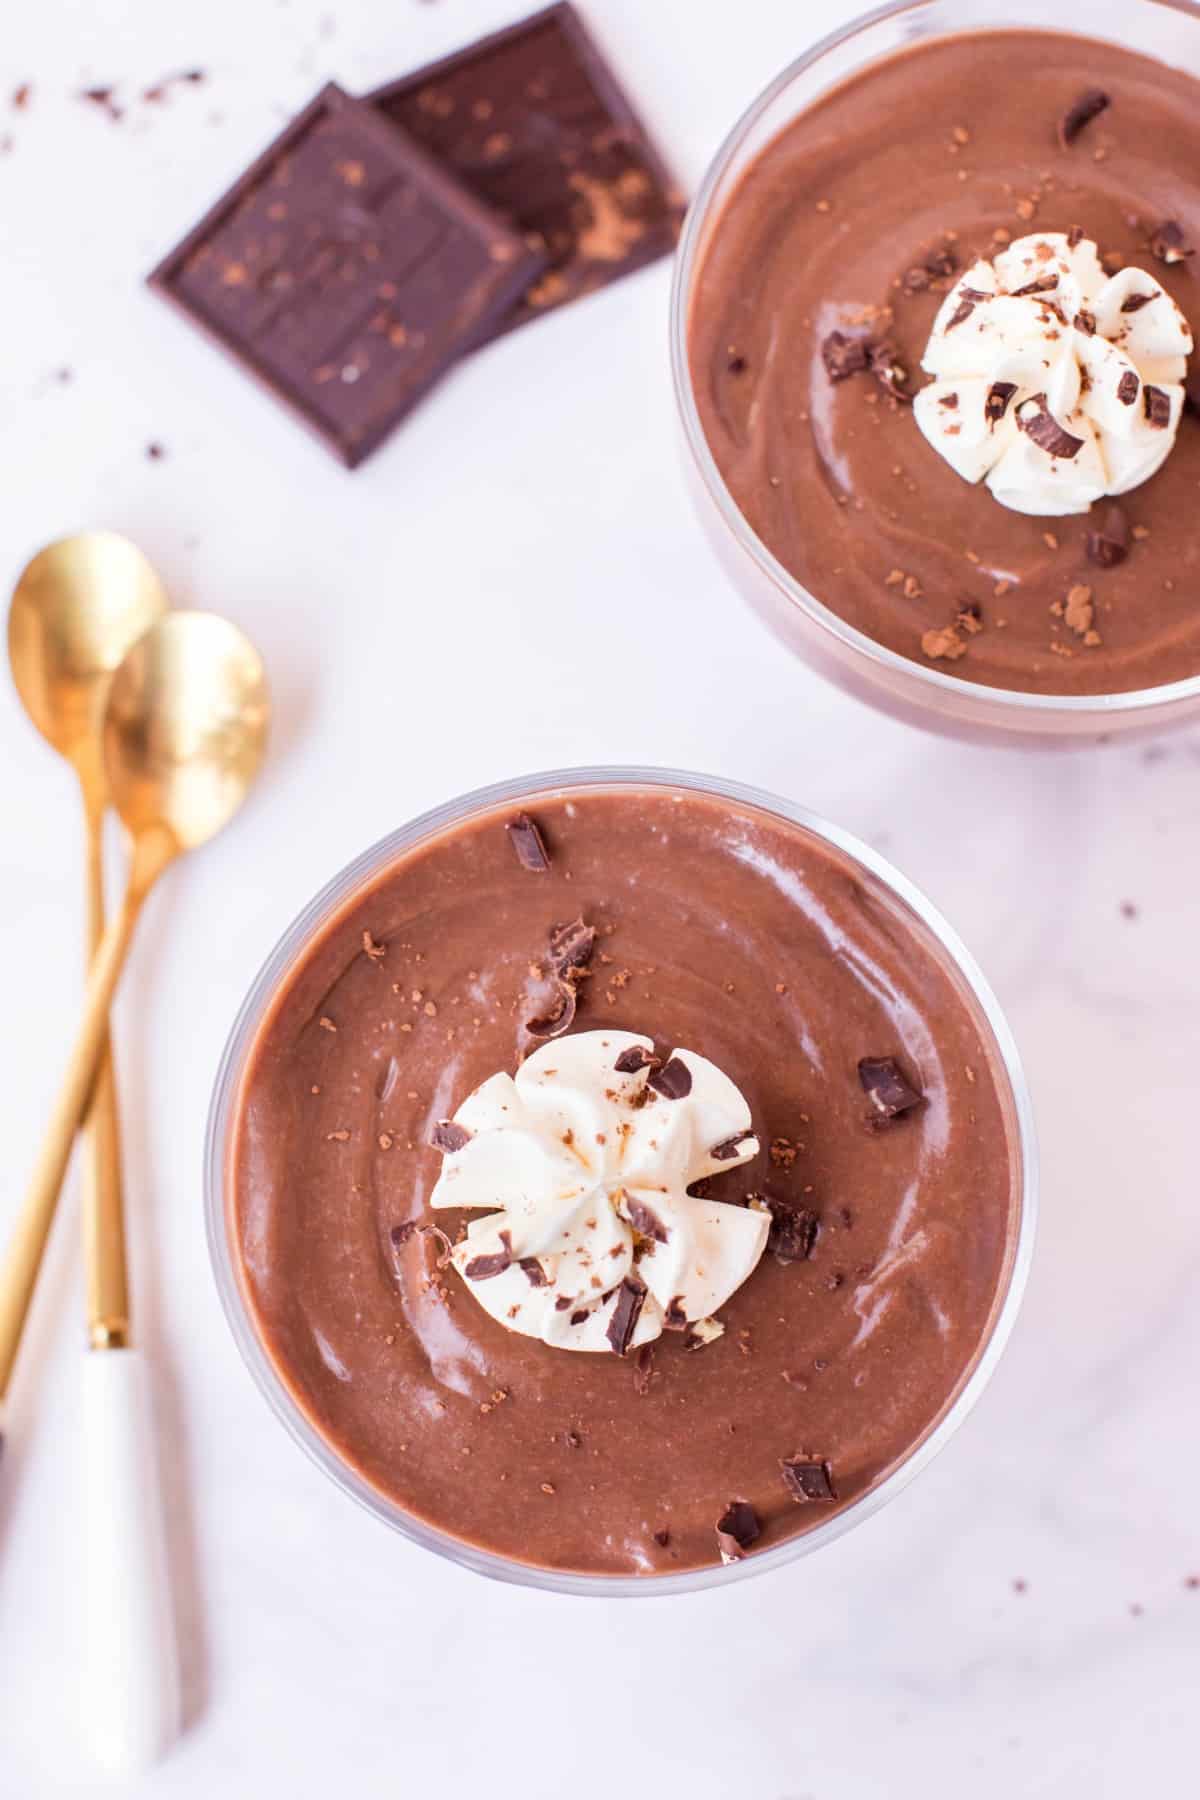 Two clear glass bowls of chocolate pudding with whipped cream. Two gold spoons on side of bowls.